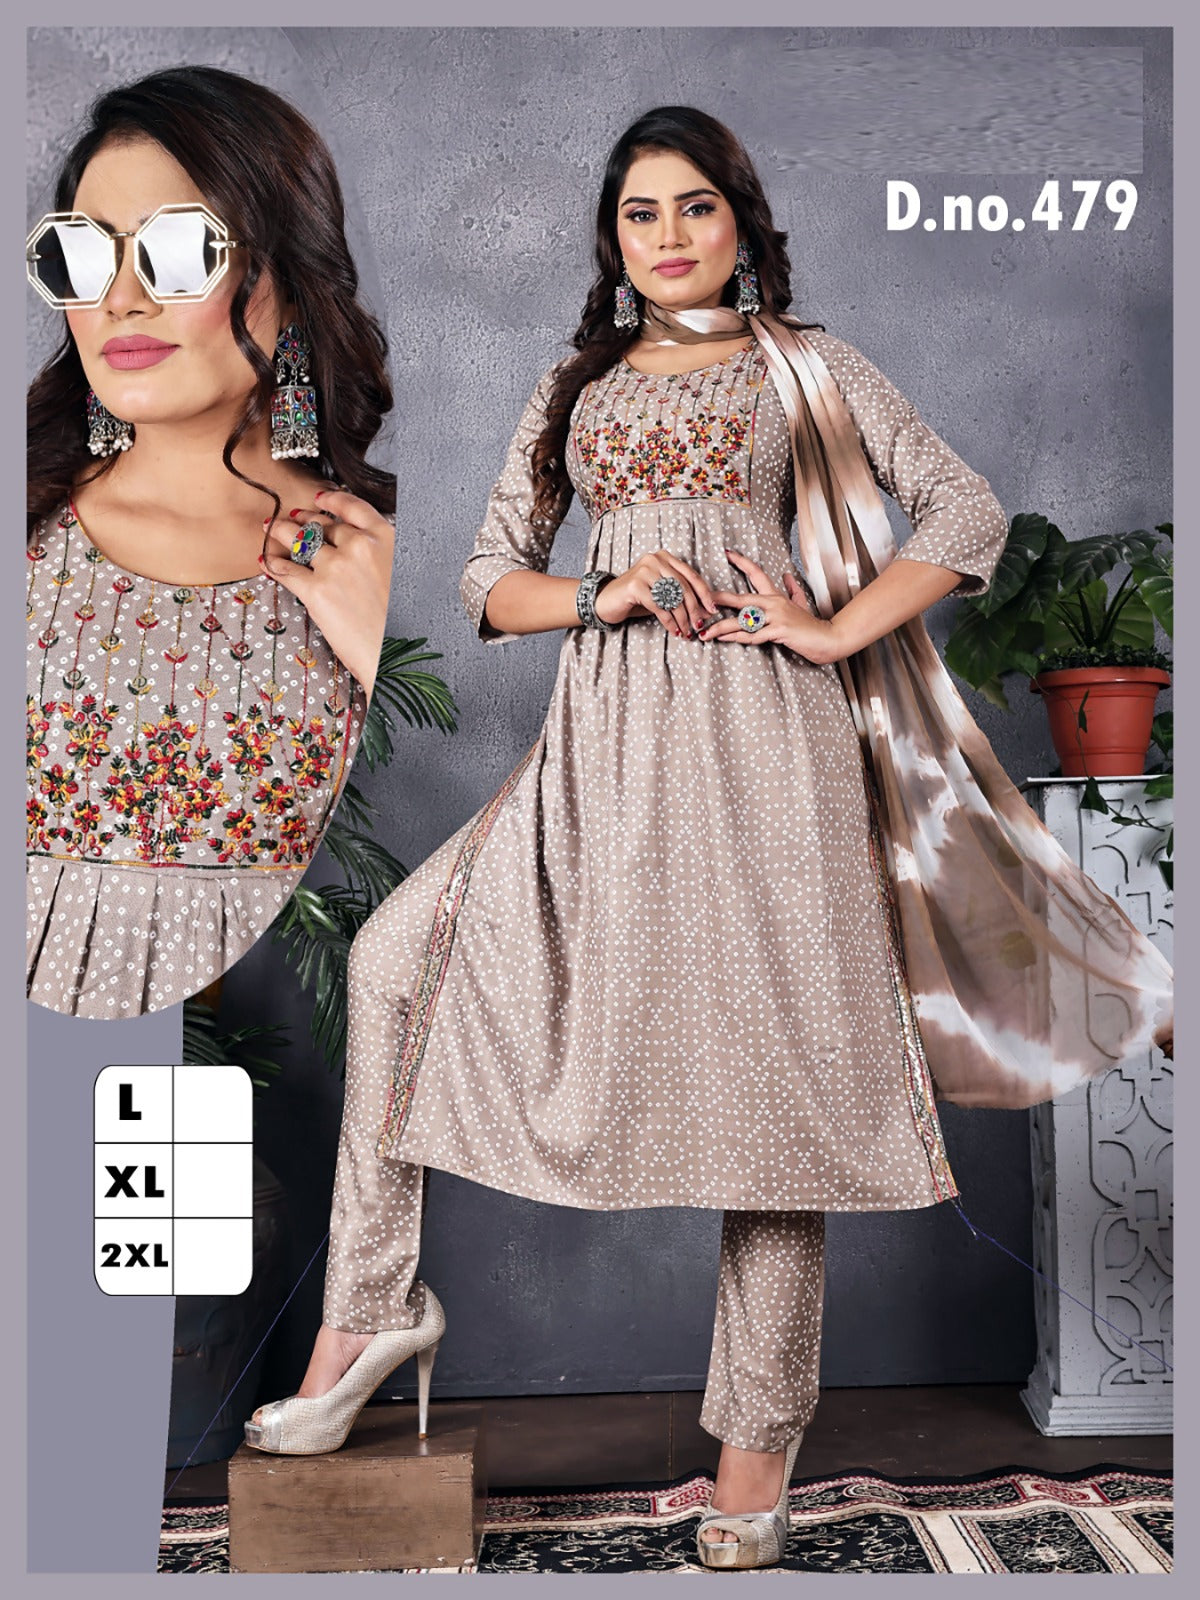 Nayra Cut 2211 Kh Readymade Pant Style Suits